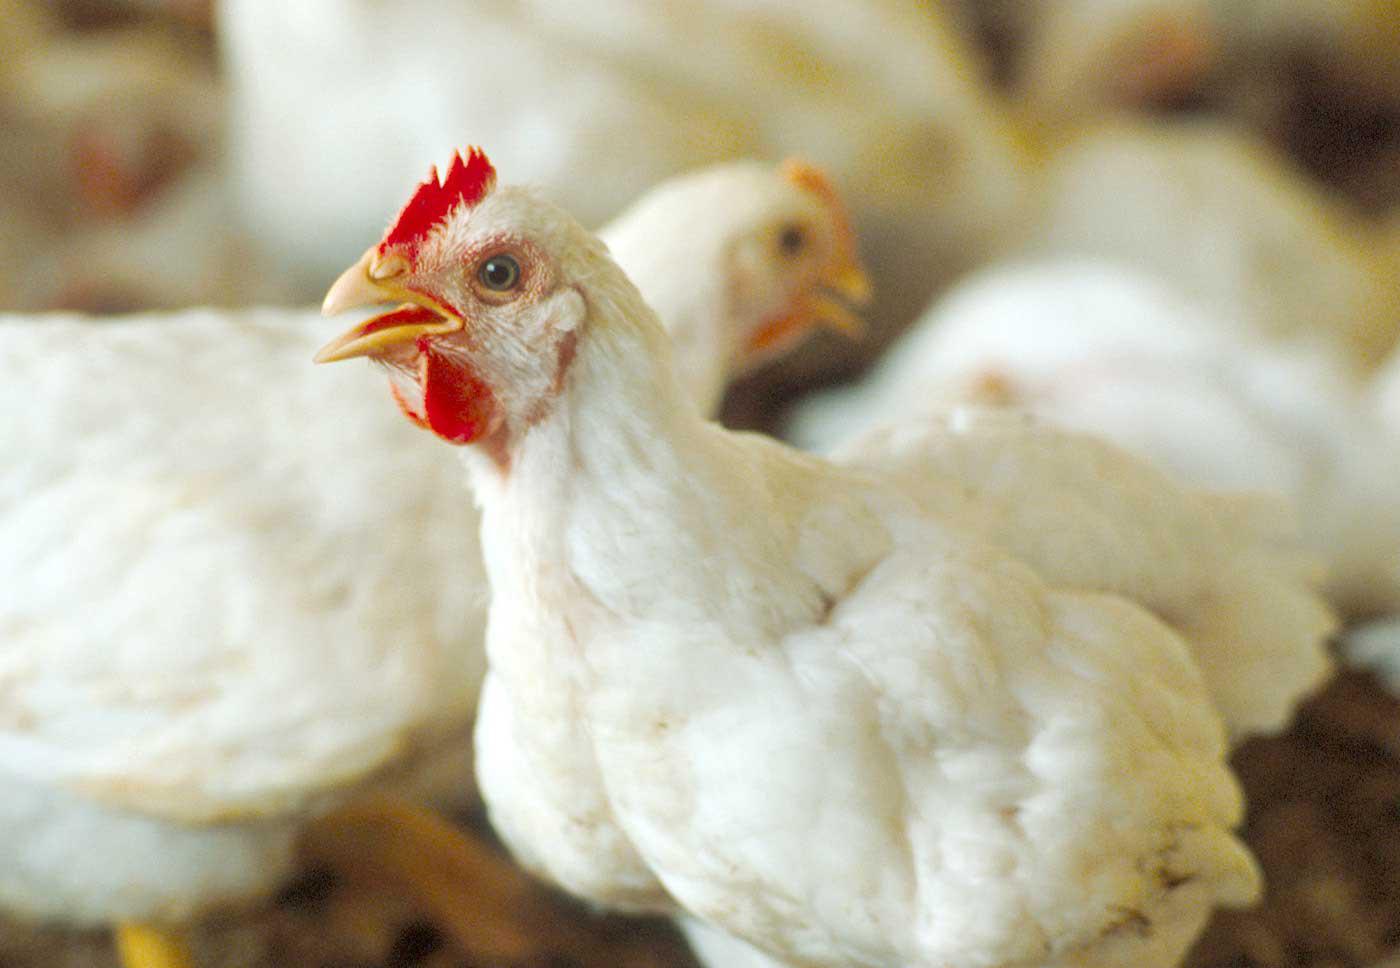 Poultry is Mississippi's top crop in terms of farmgate value. The commodity posted an estimated value of $2.37 billion for 2009. (Photo by MSU Ag Communications/Jim Lytle)